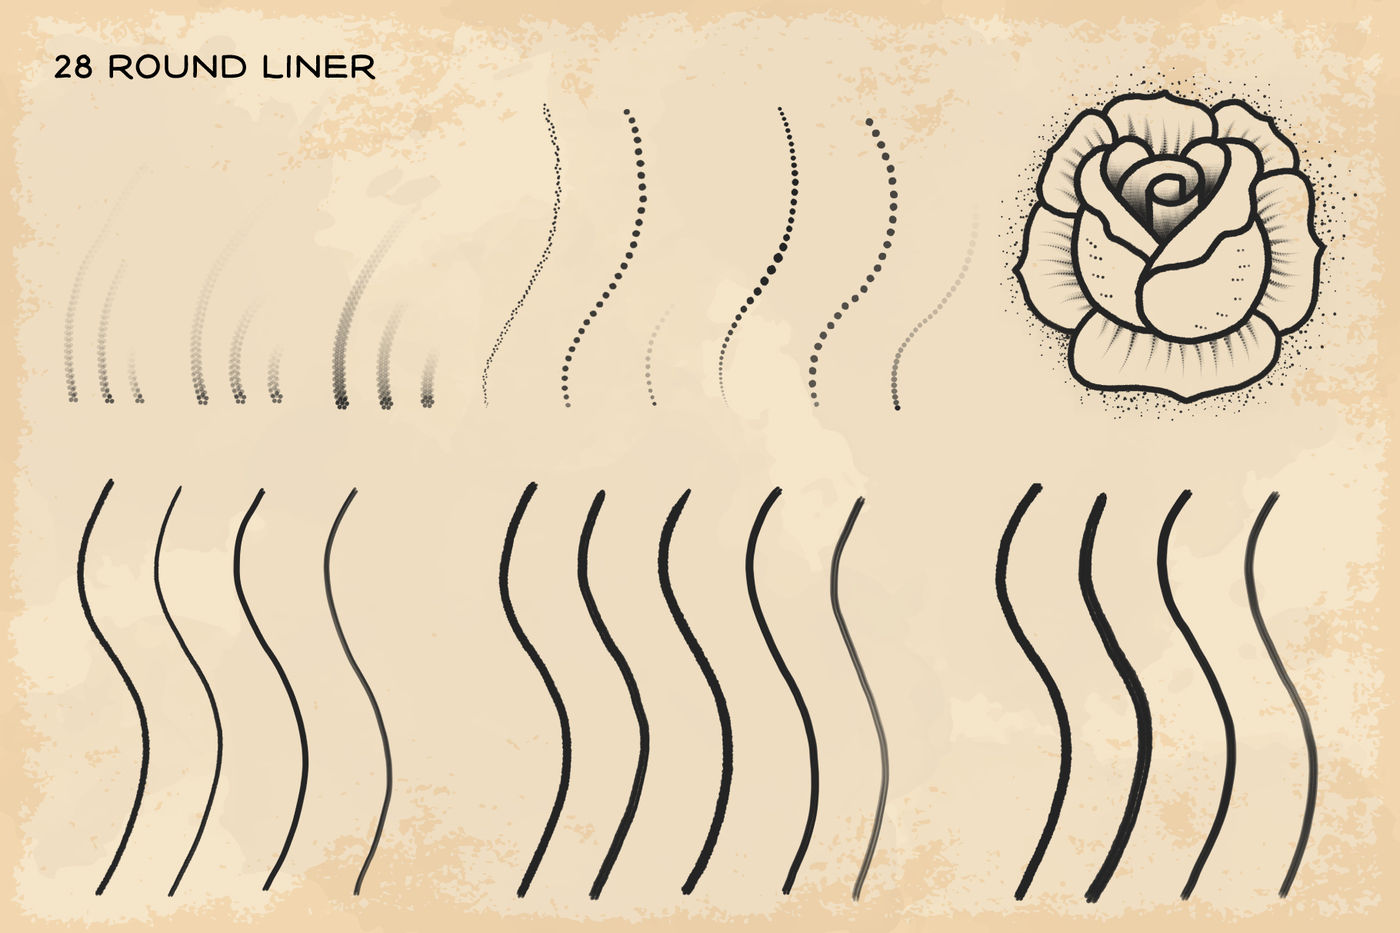 Free Chicano Lettering Tattoo Brushes for Procreate application by Haris  Jonson  Brushestock